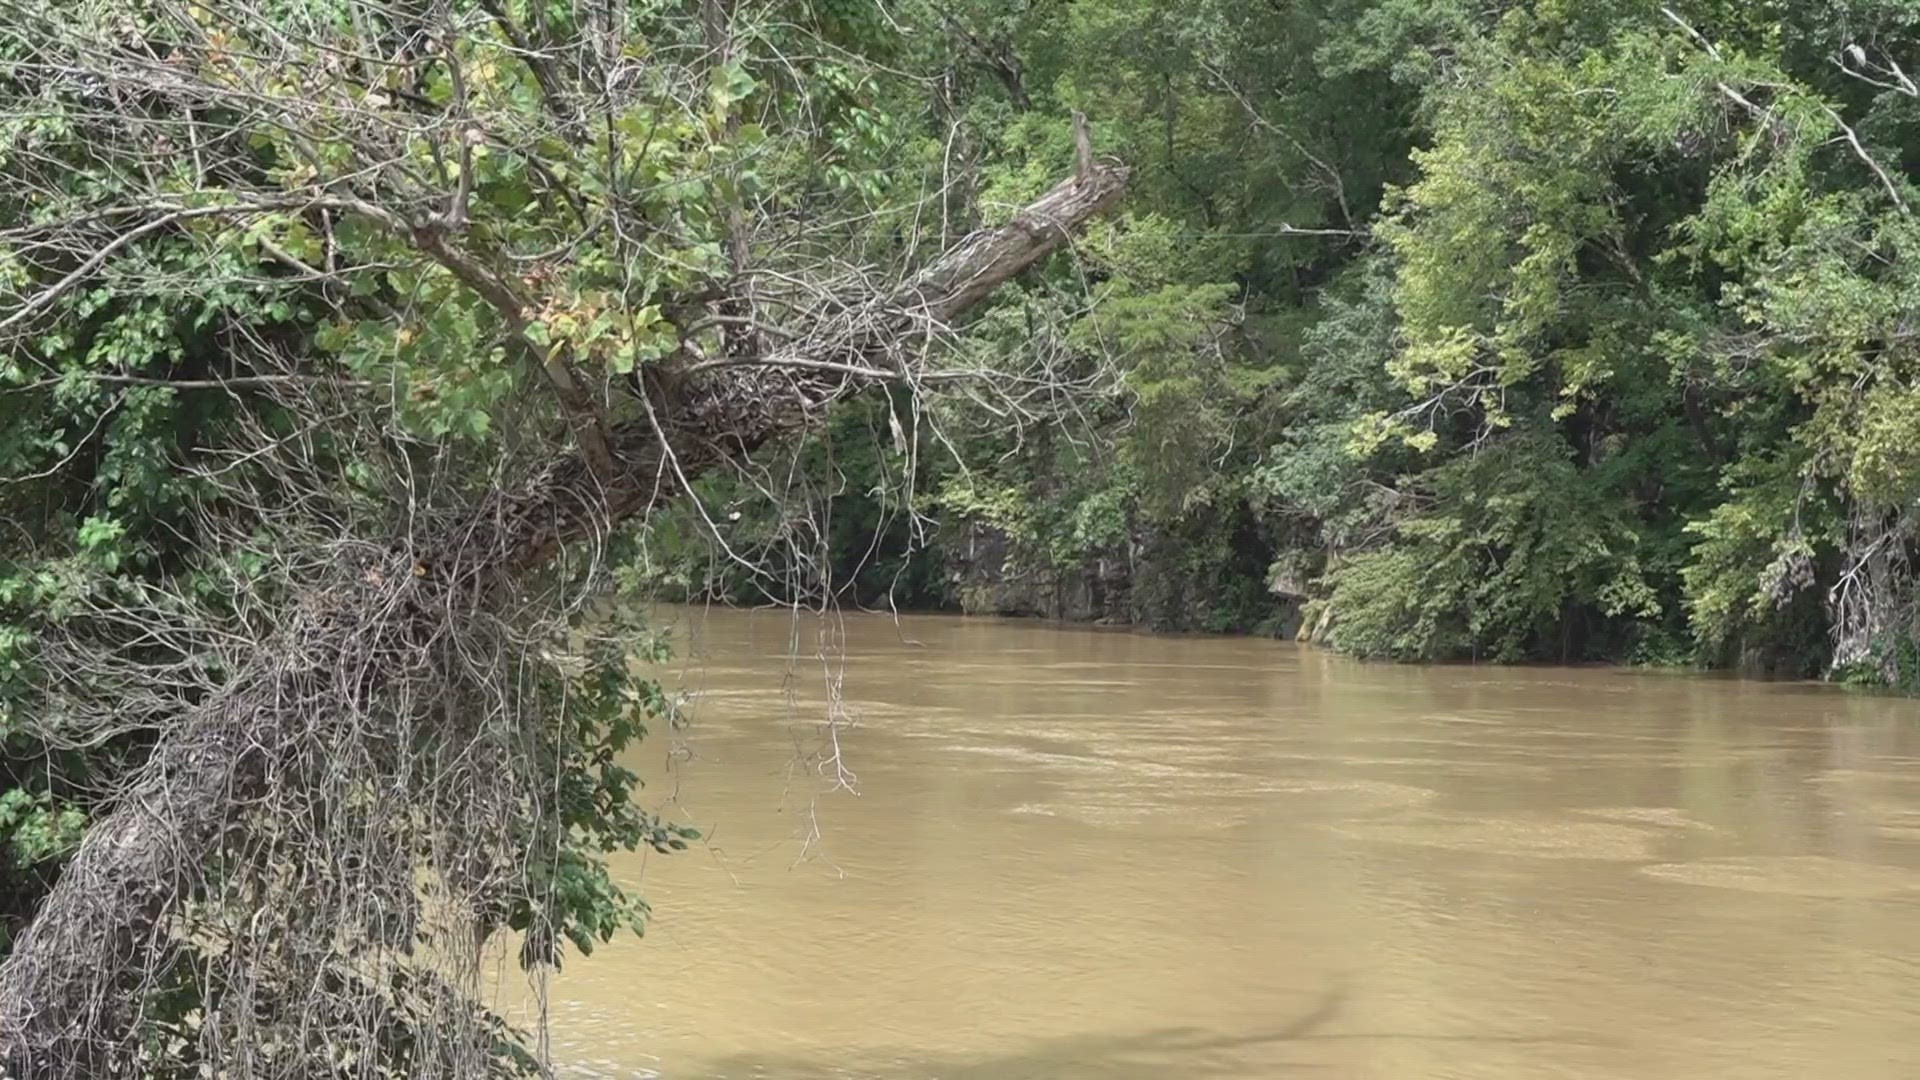 According to TWRA, wildlife officers reported a high number of dead fish on Friday on the Pigeon River from Edwina Bridge down to the Newport police station.